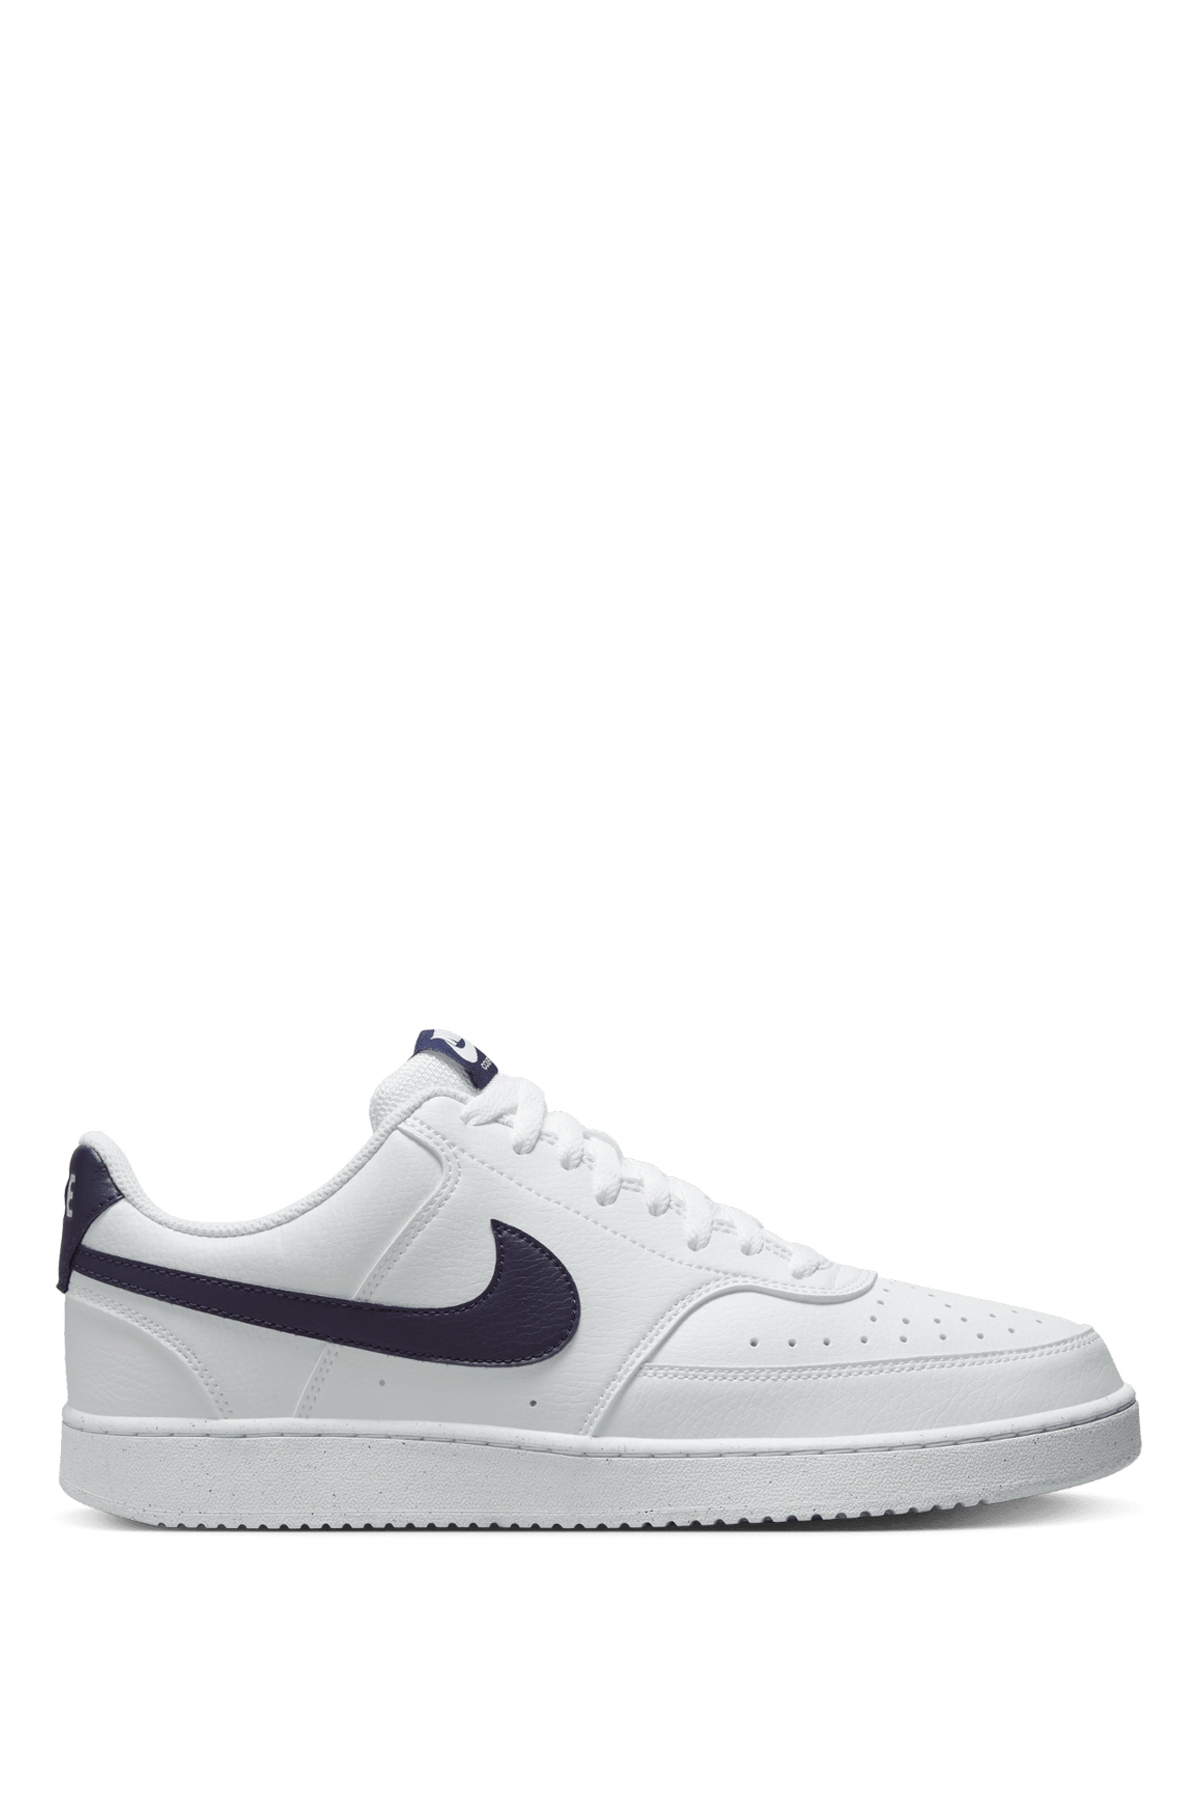 Court vision low next nature. Nike Court Vision 1 Low next nature. Nike Court Vision 1. Nike Court Vision Low next nature. Nike Court Vision lo женские.